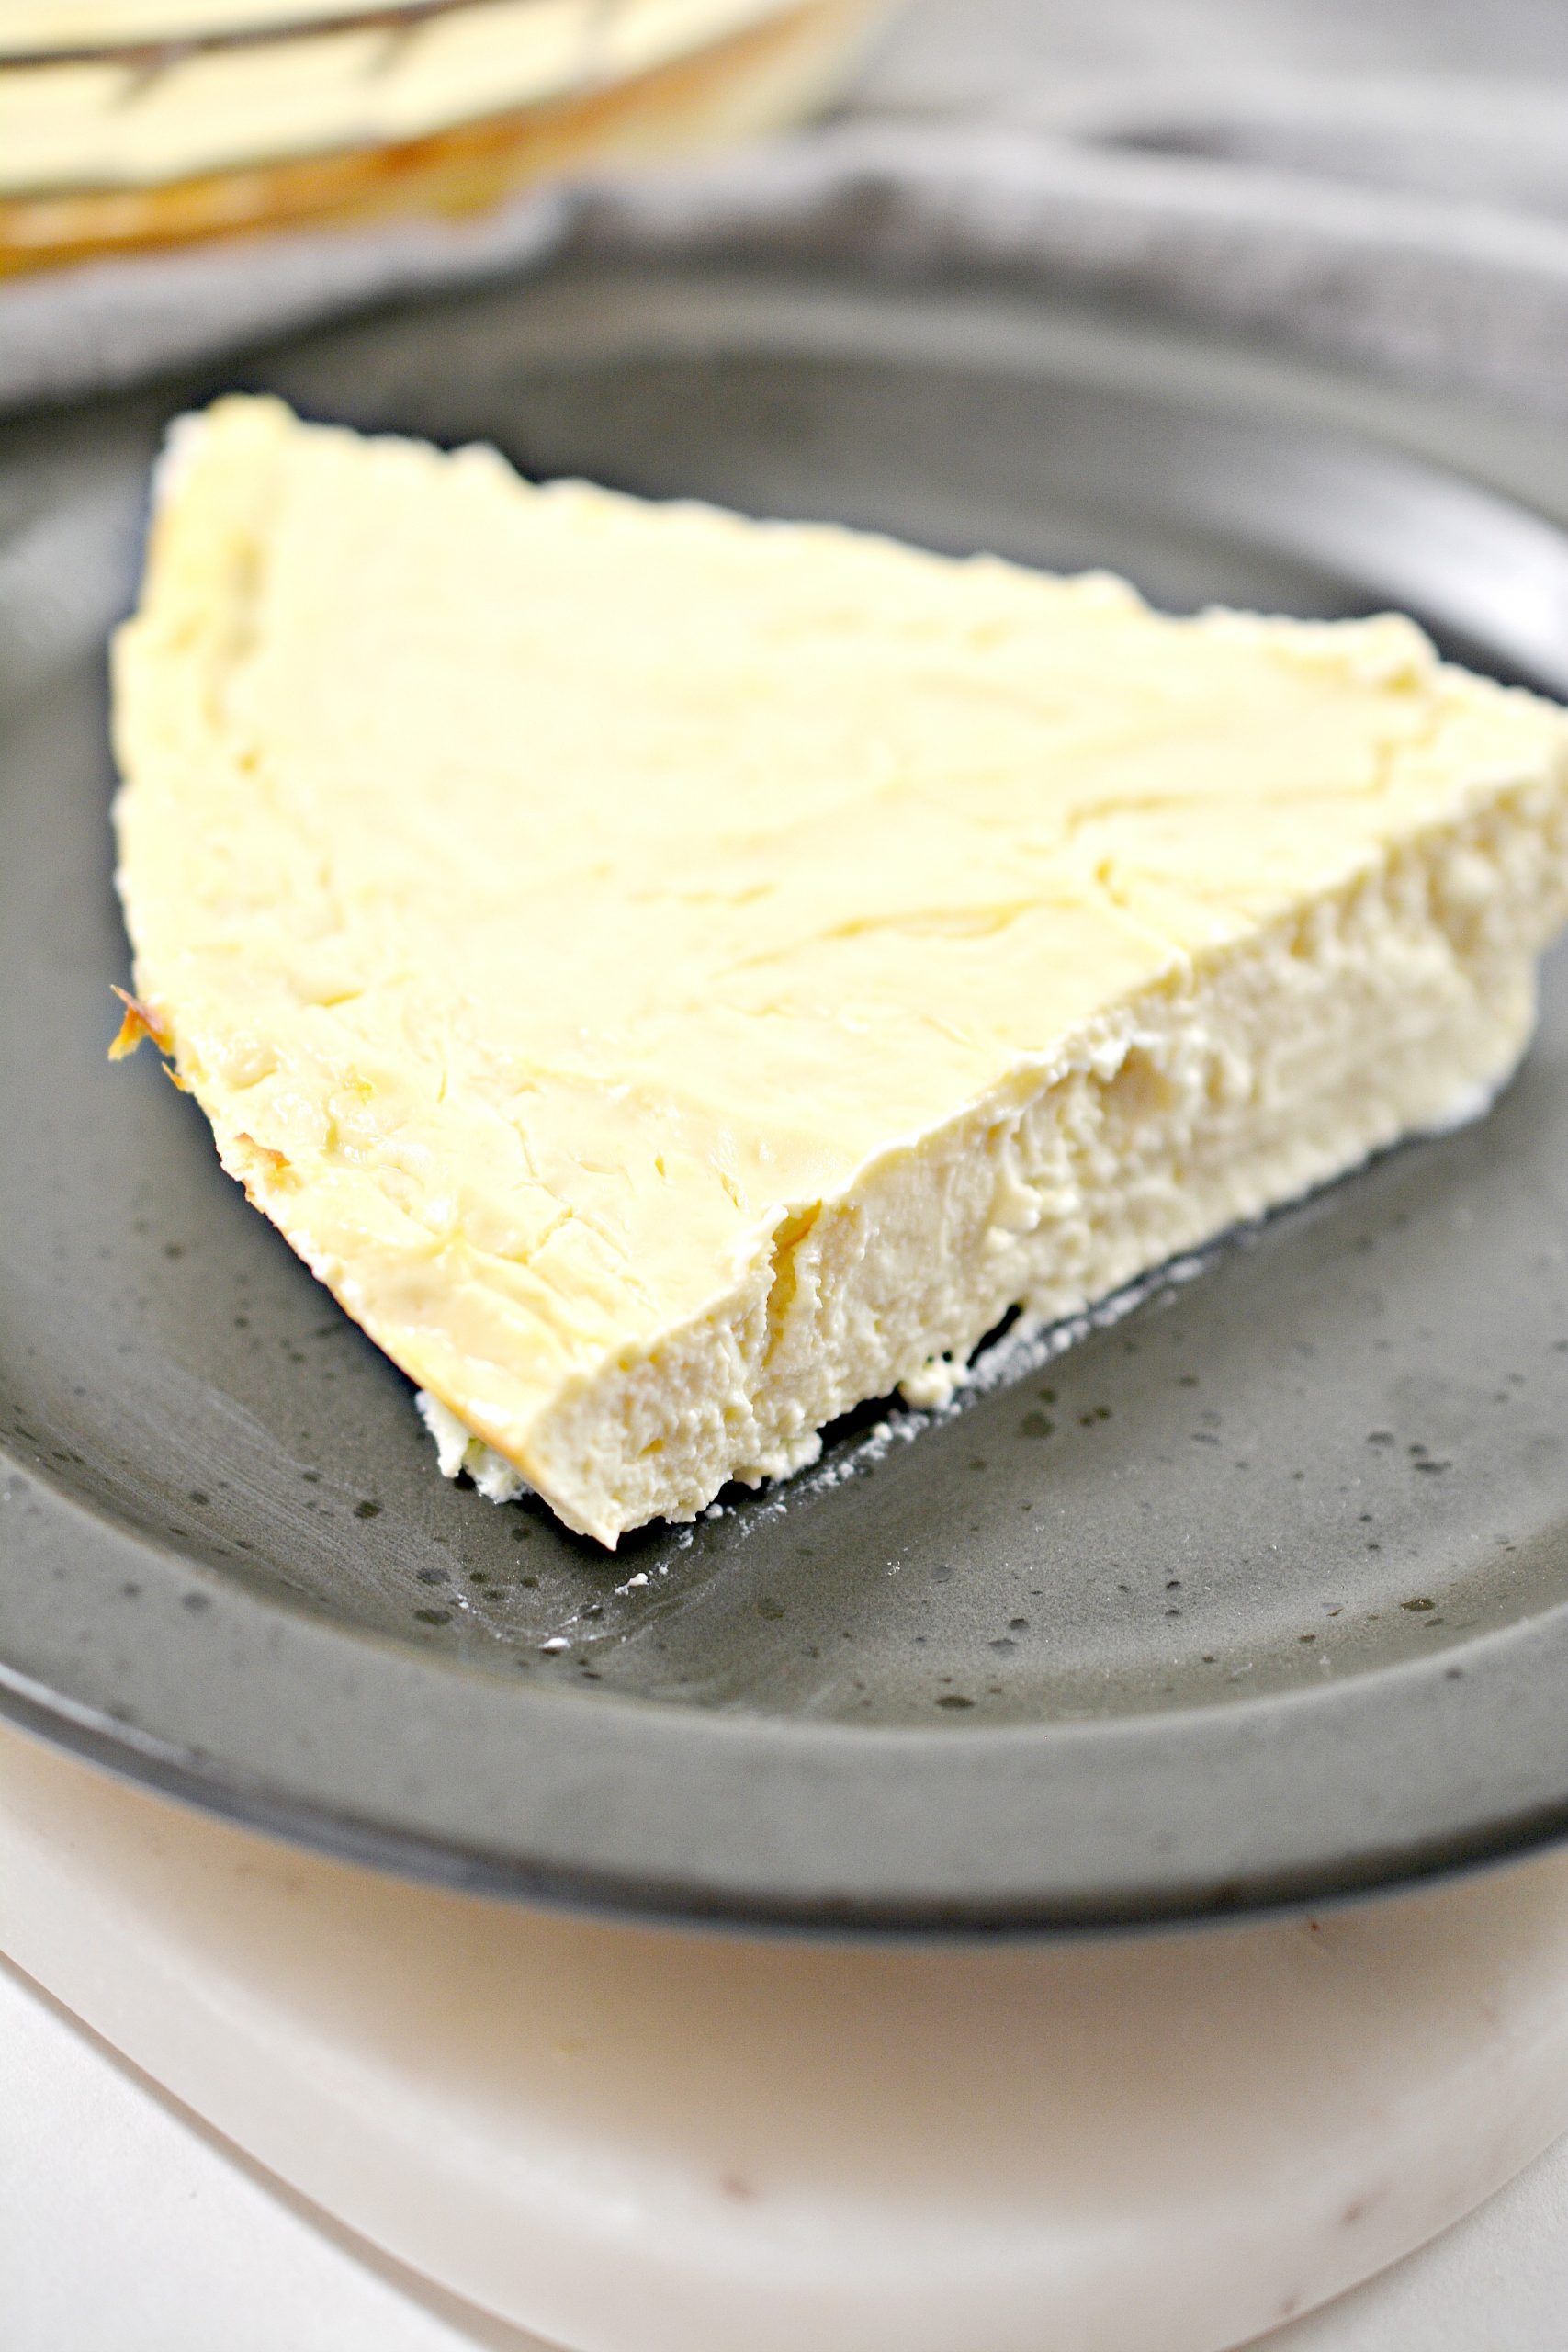 Weight Watchers Skinny Points Cheesecake Life She Has